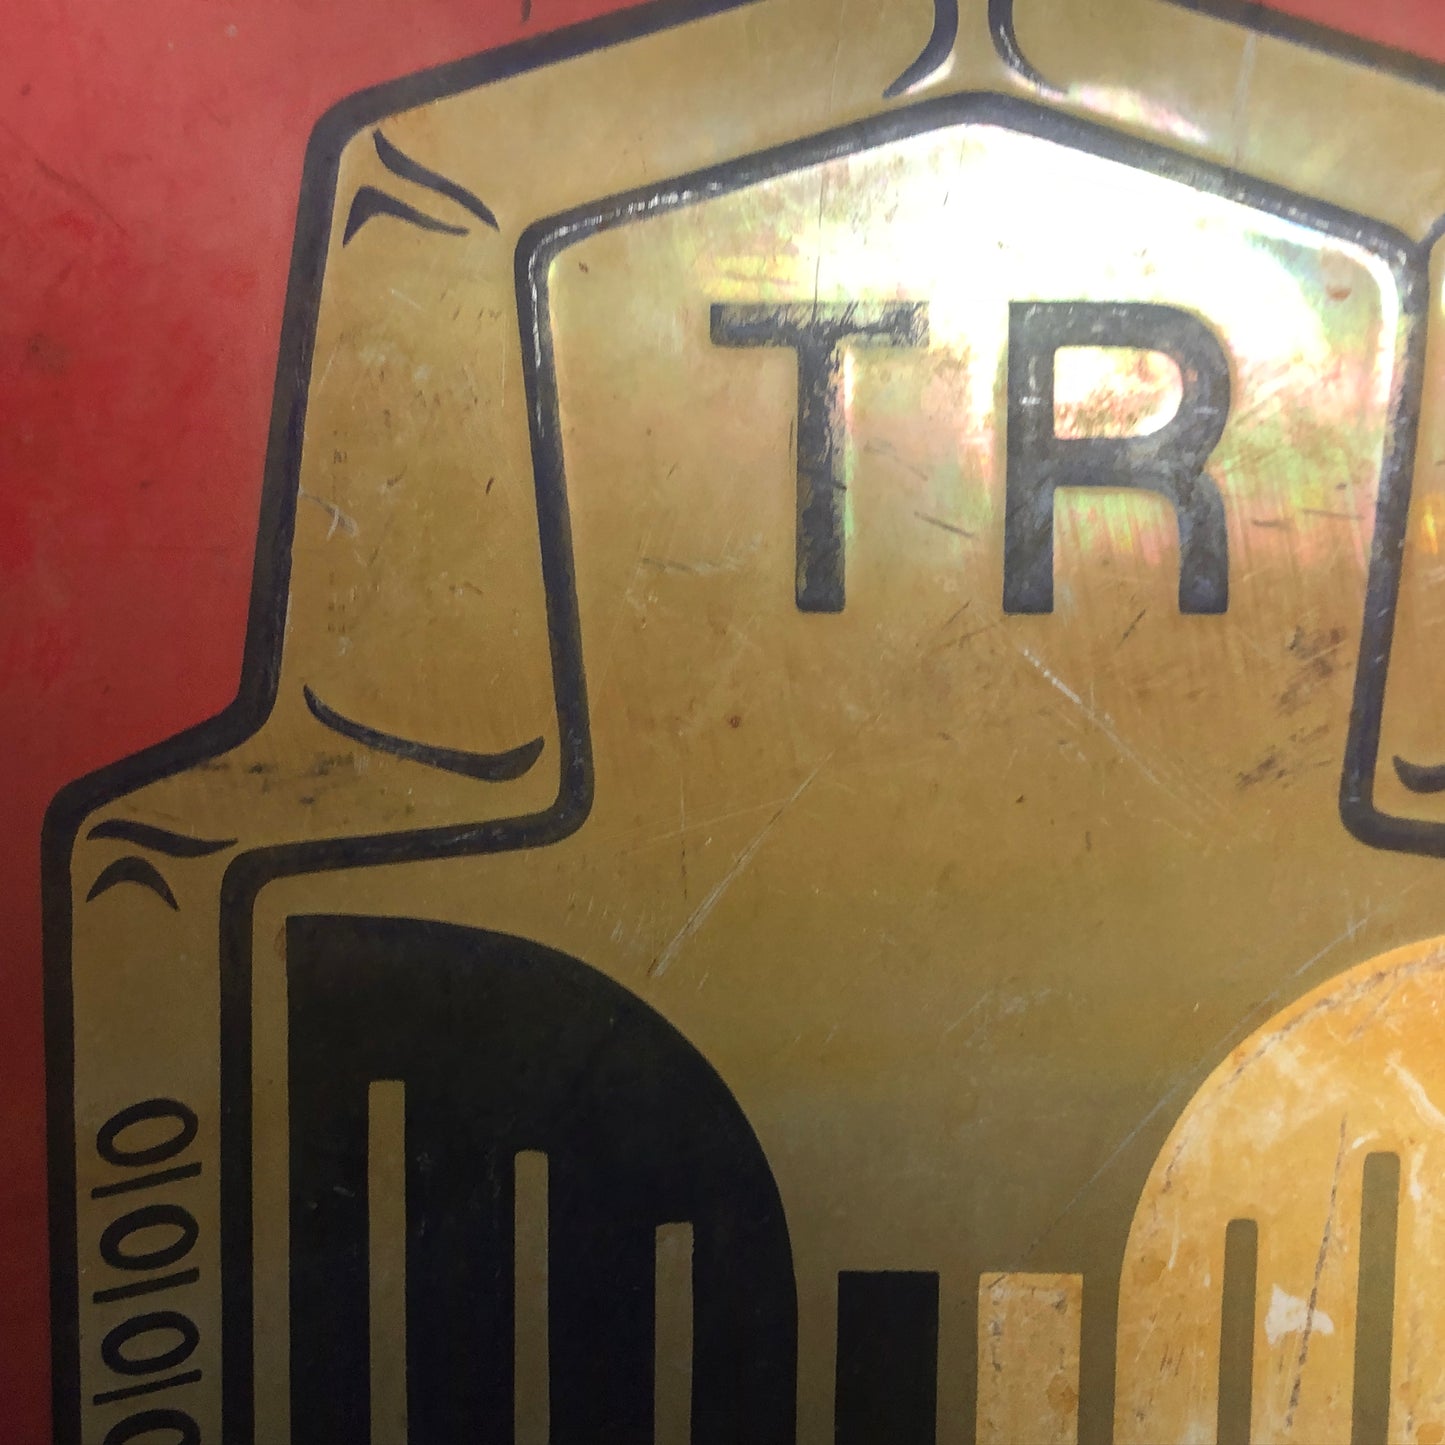 Triumph, Original Triumph TR Enamelled Sign with Patina and Signs of Time